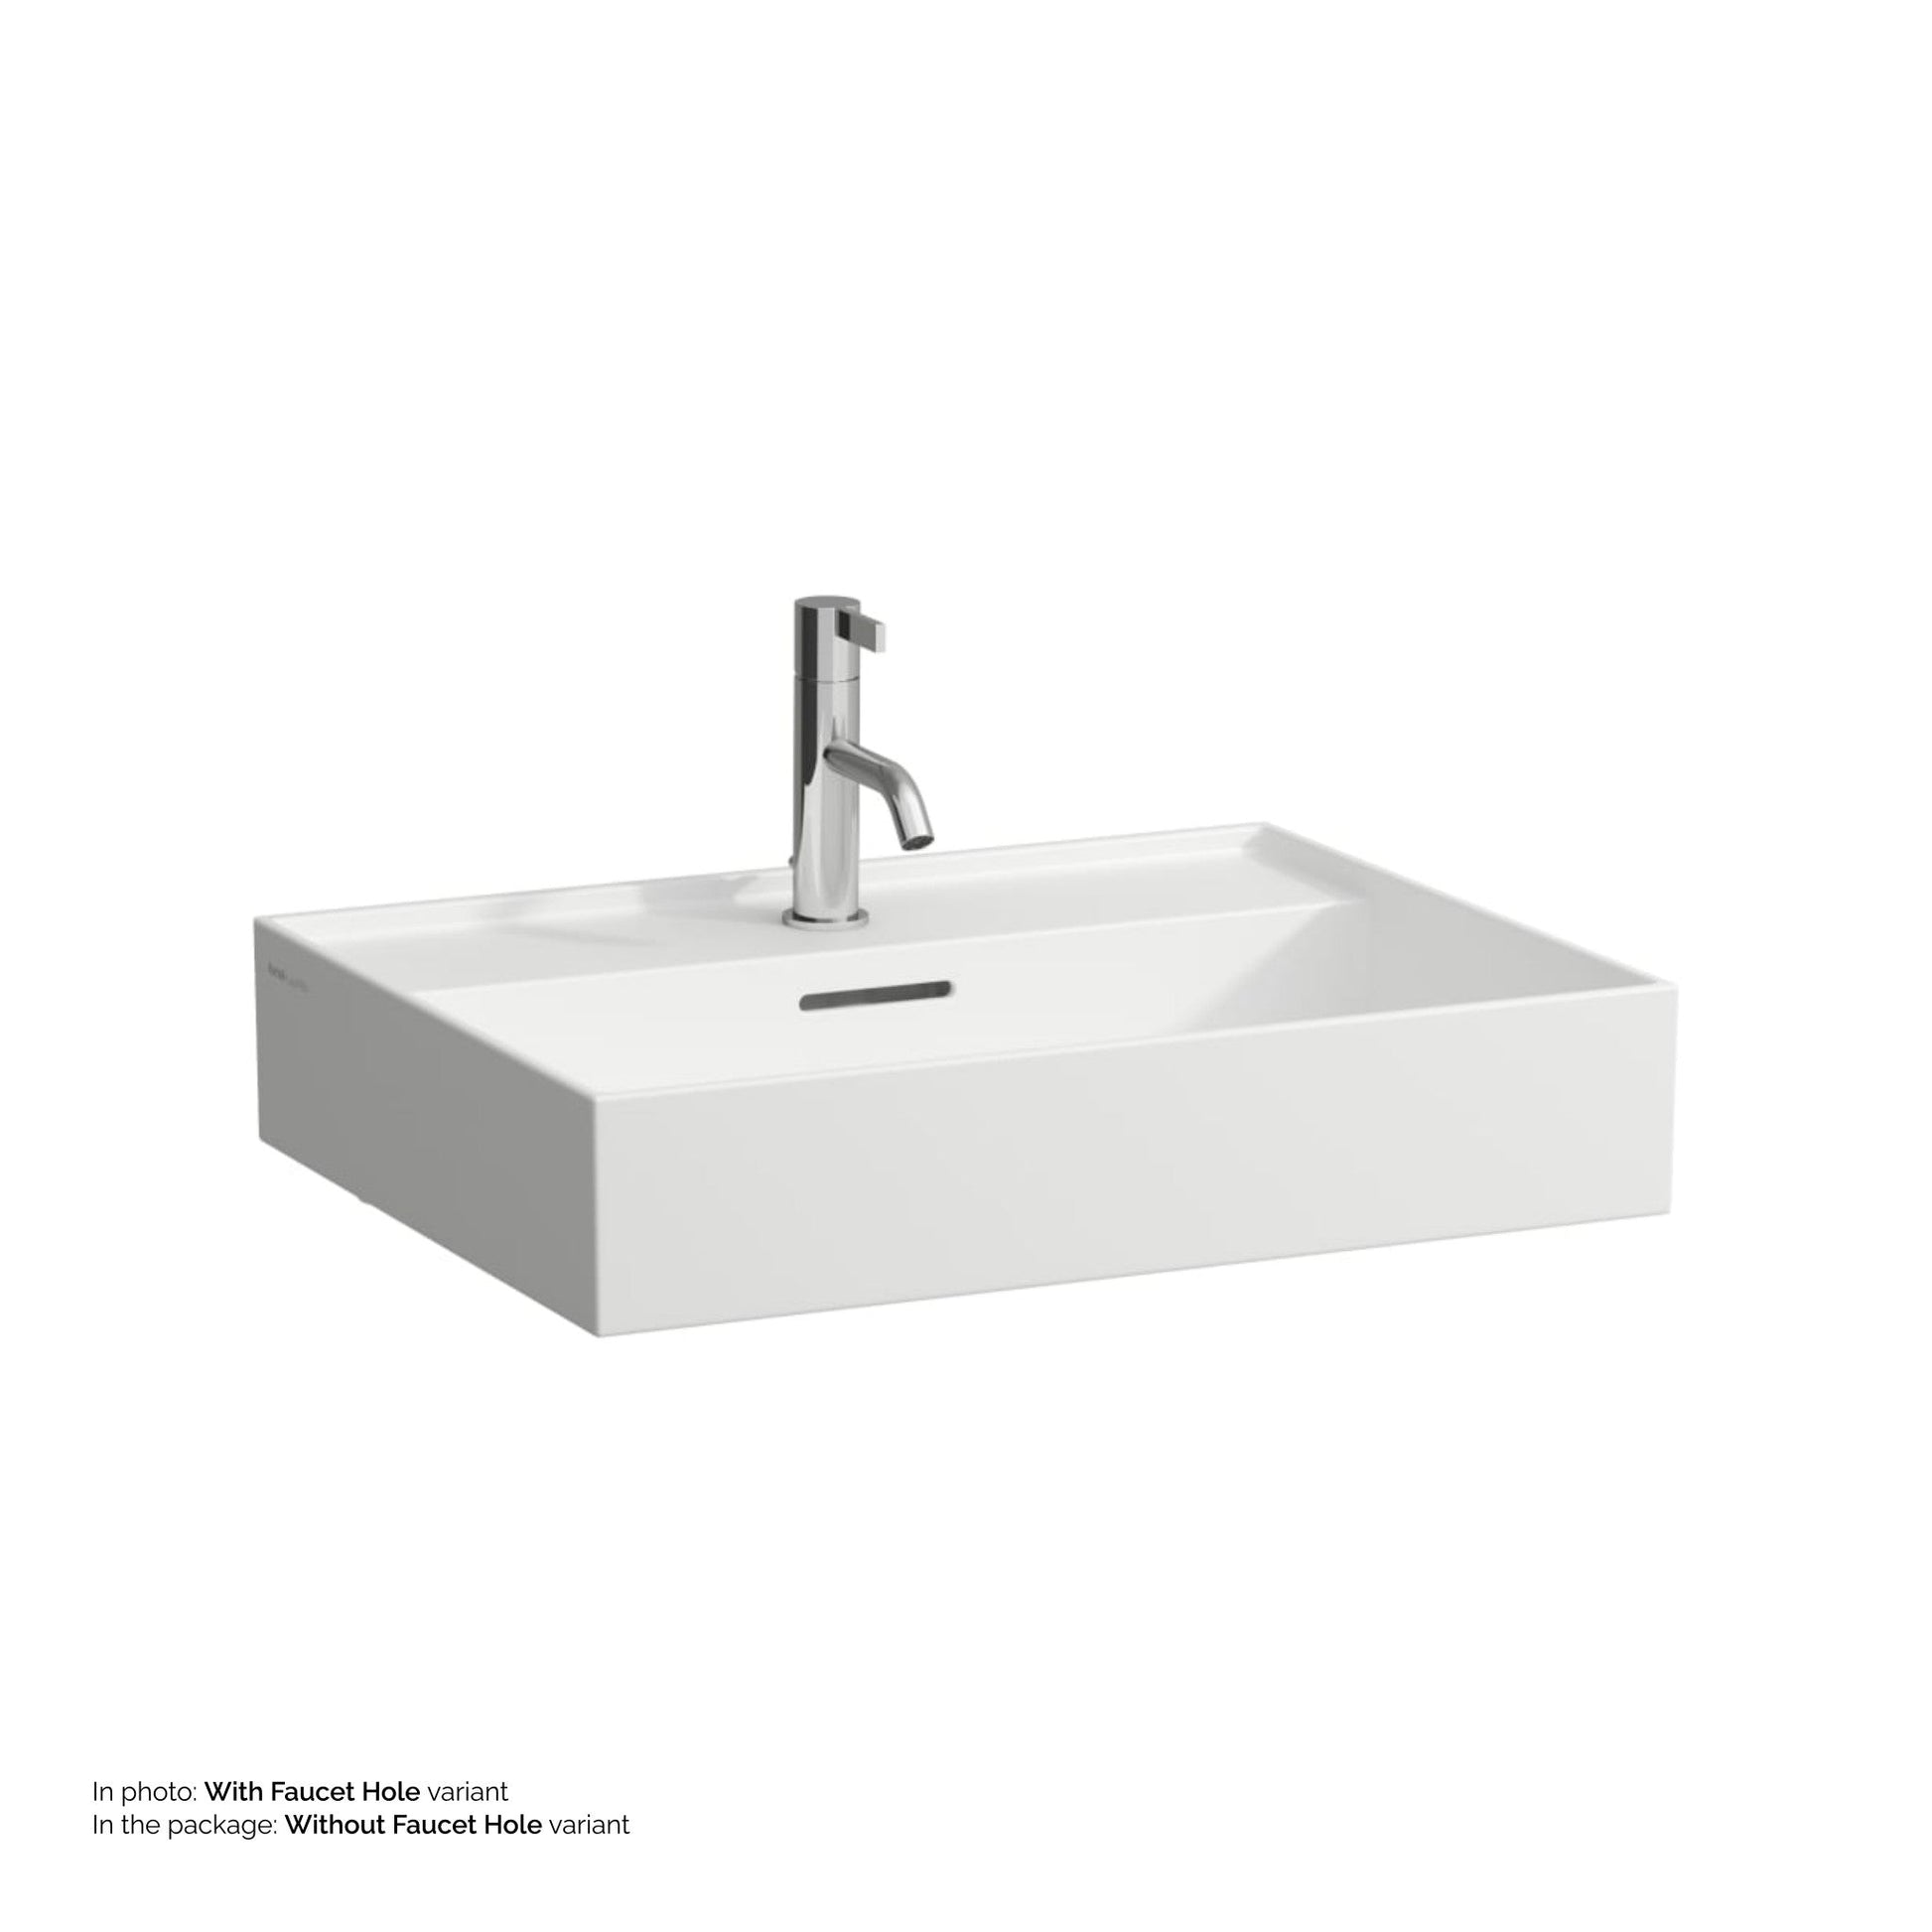 Laufen Kartell 24" x 18" Matte White Countertop Bathroom Sink Without Faucet Hole